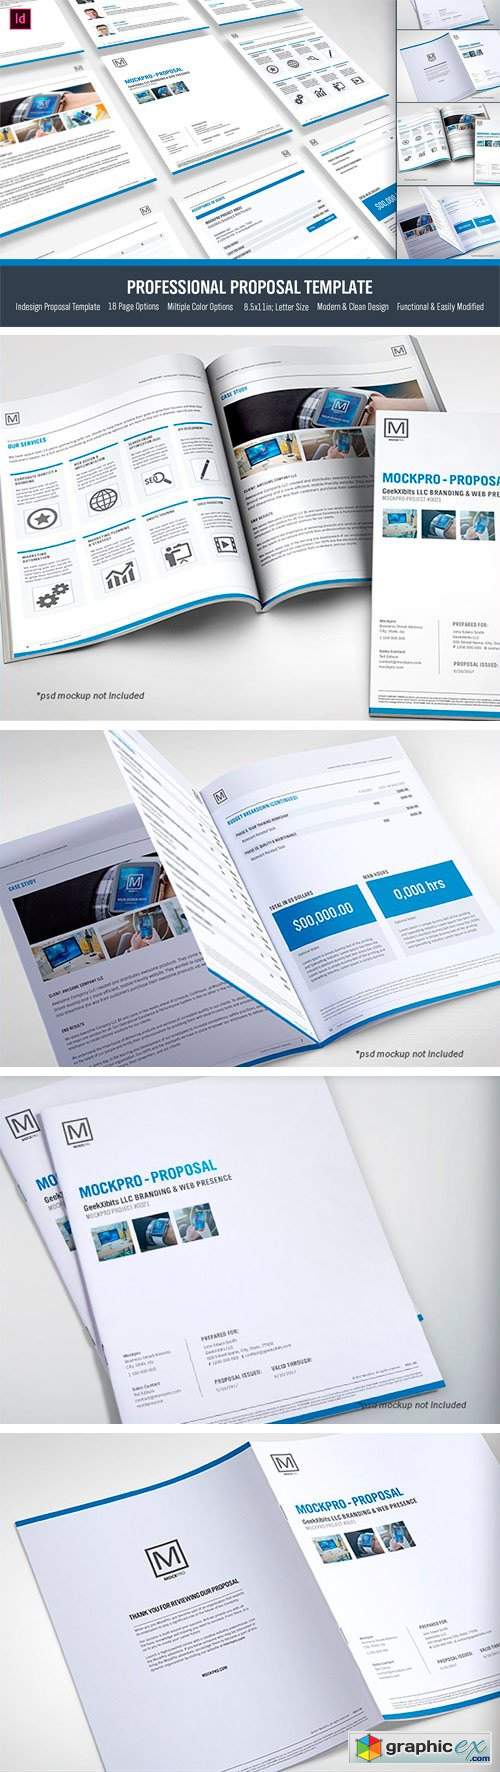 Simple Proposal Template Indesign